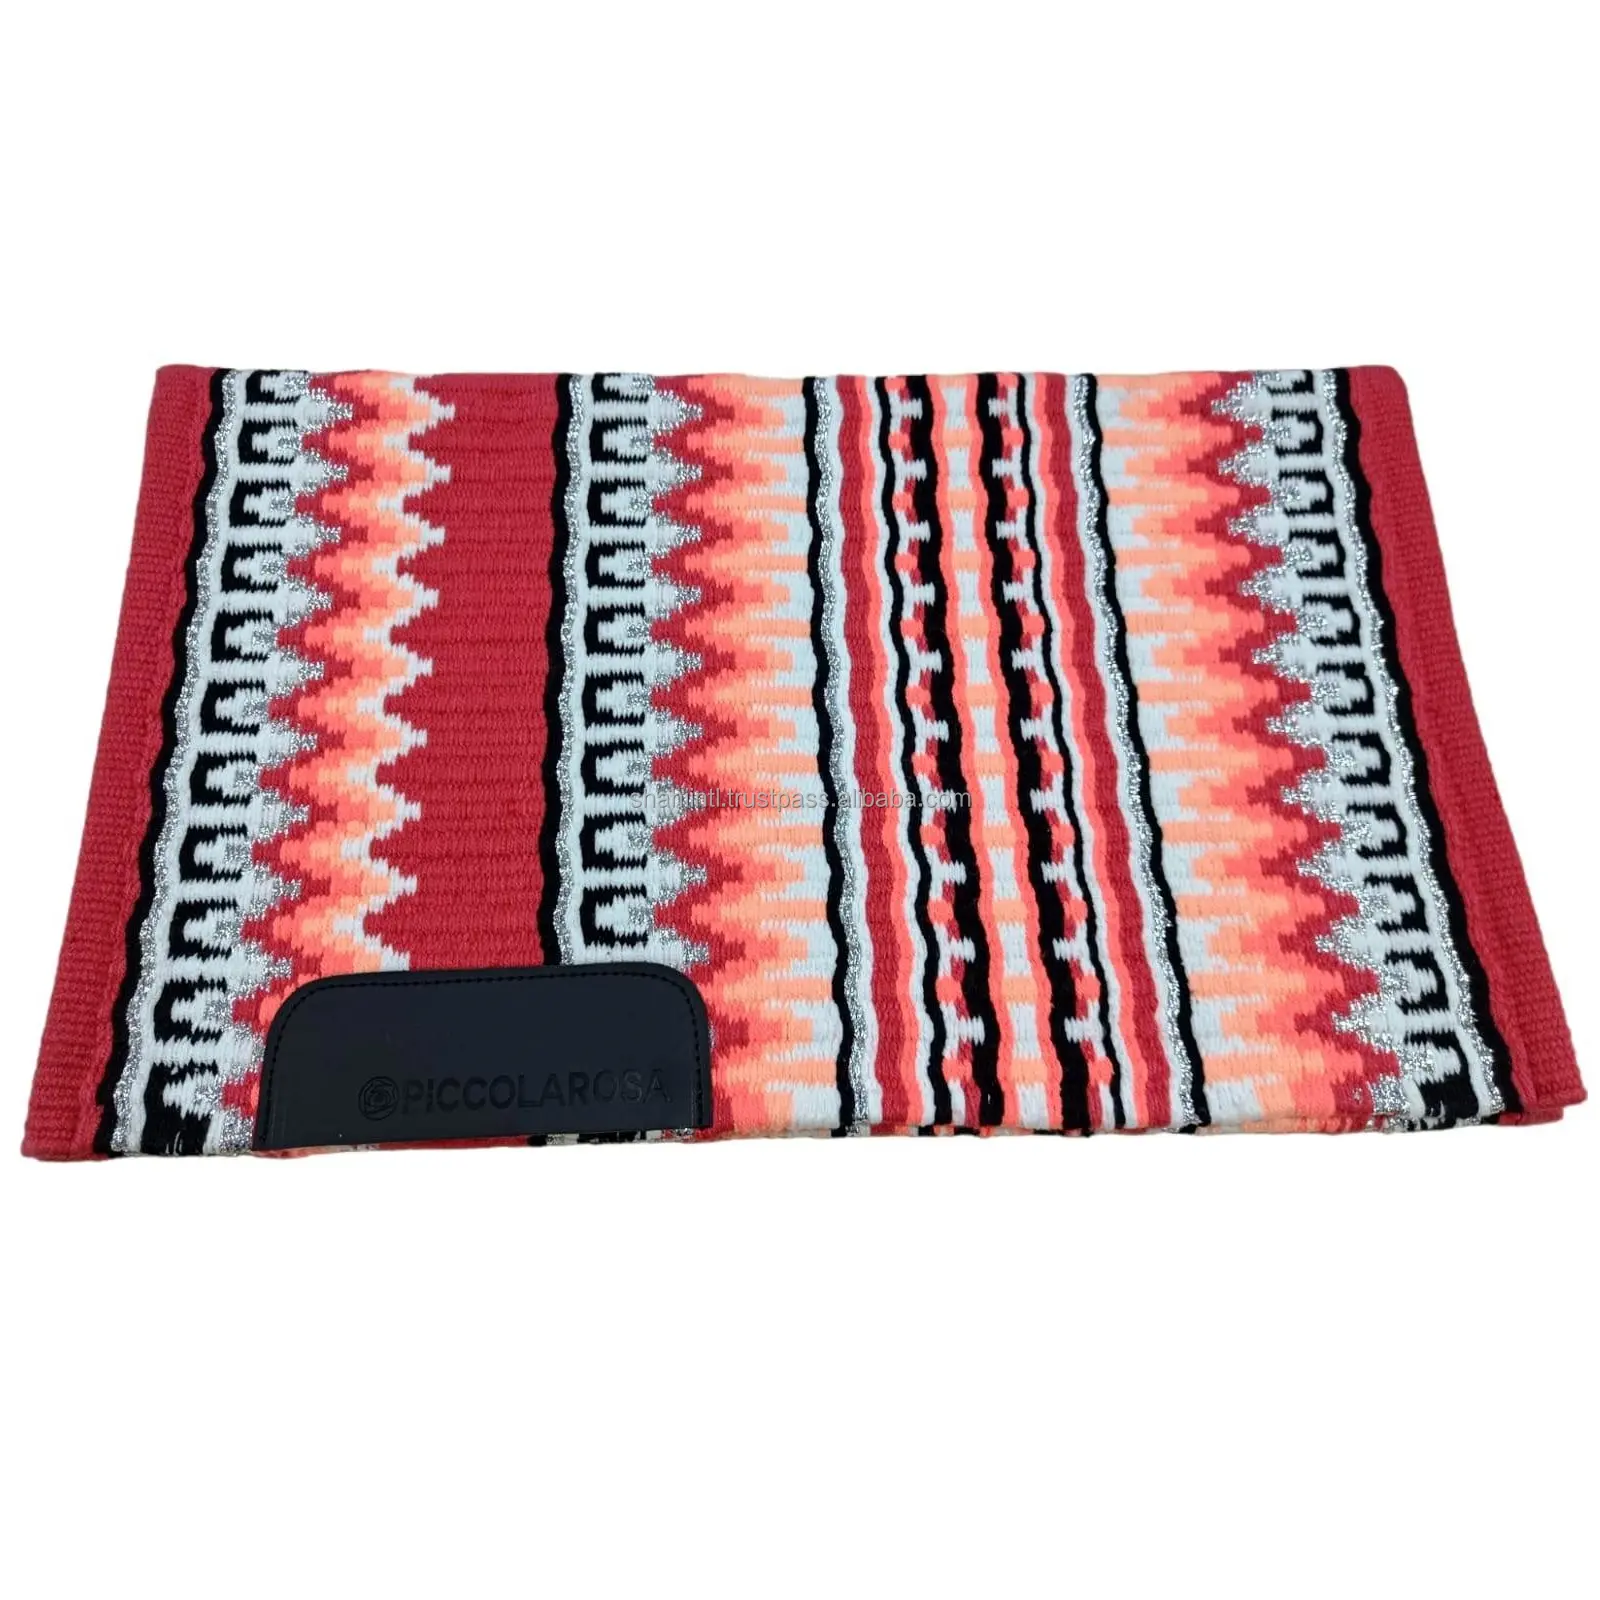 Custom Outdoor Equestrian Horse Western Newzealand Wool Show Saddle Blanket Fine Quality Size 34x42 & Weight 3.3 to 3.5 KG Each